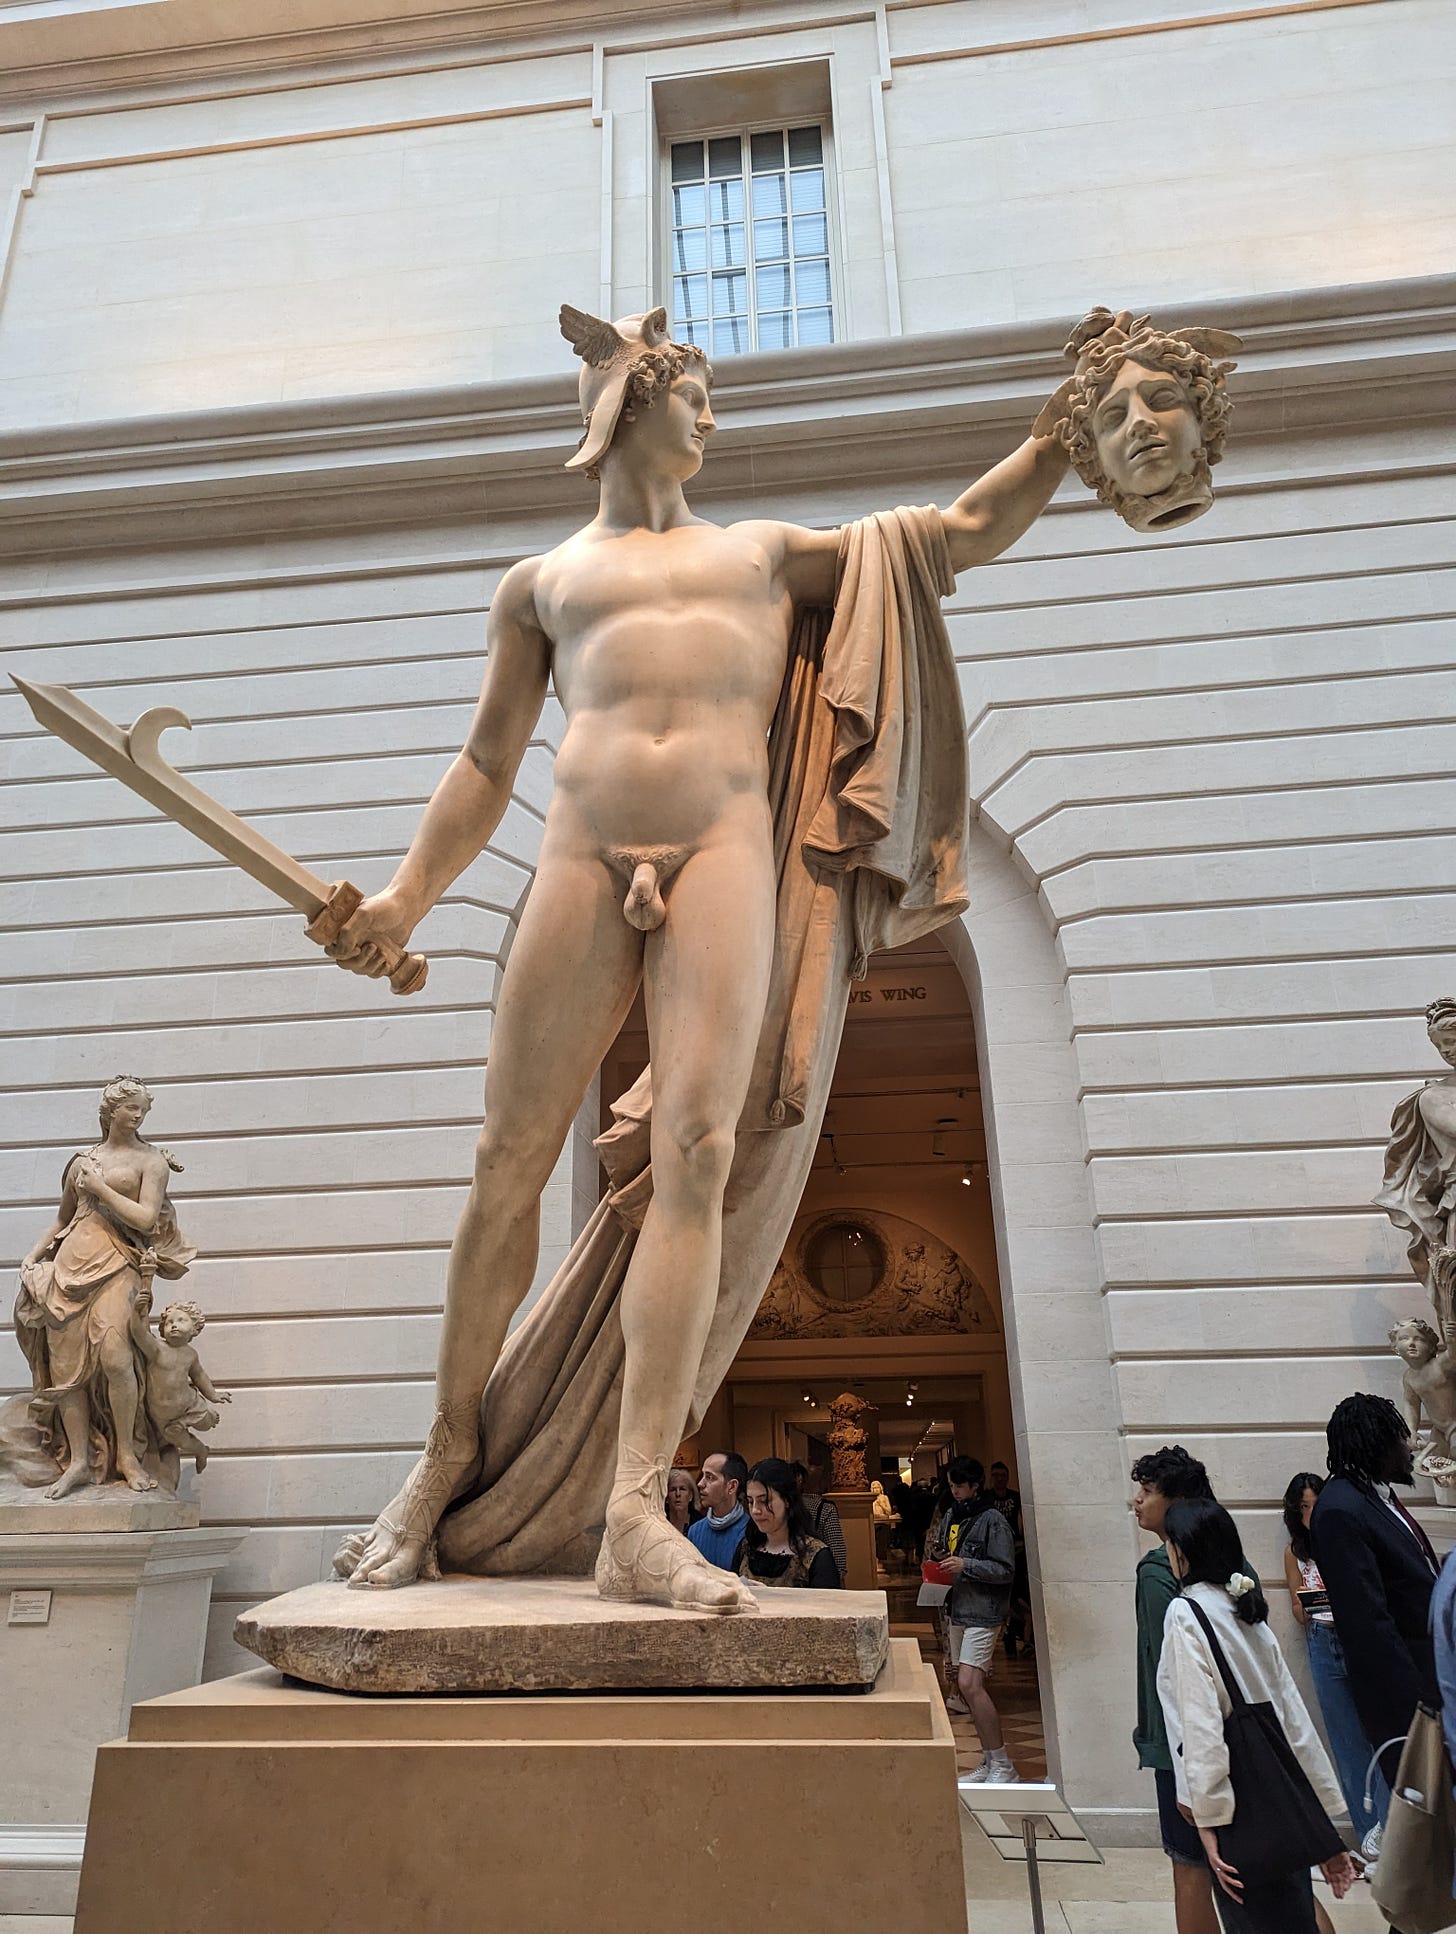 the Greek hero Perseus poses with the head of the Gorgon Medusa. In one hand, he holds a weapon. In the other, he holds Medusa's head. He's depicted as mostly nude with a robe or cape draped over his arm.